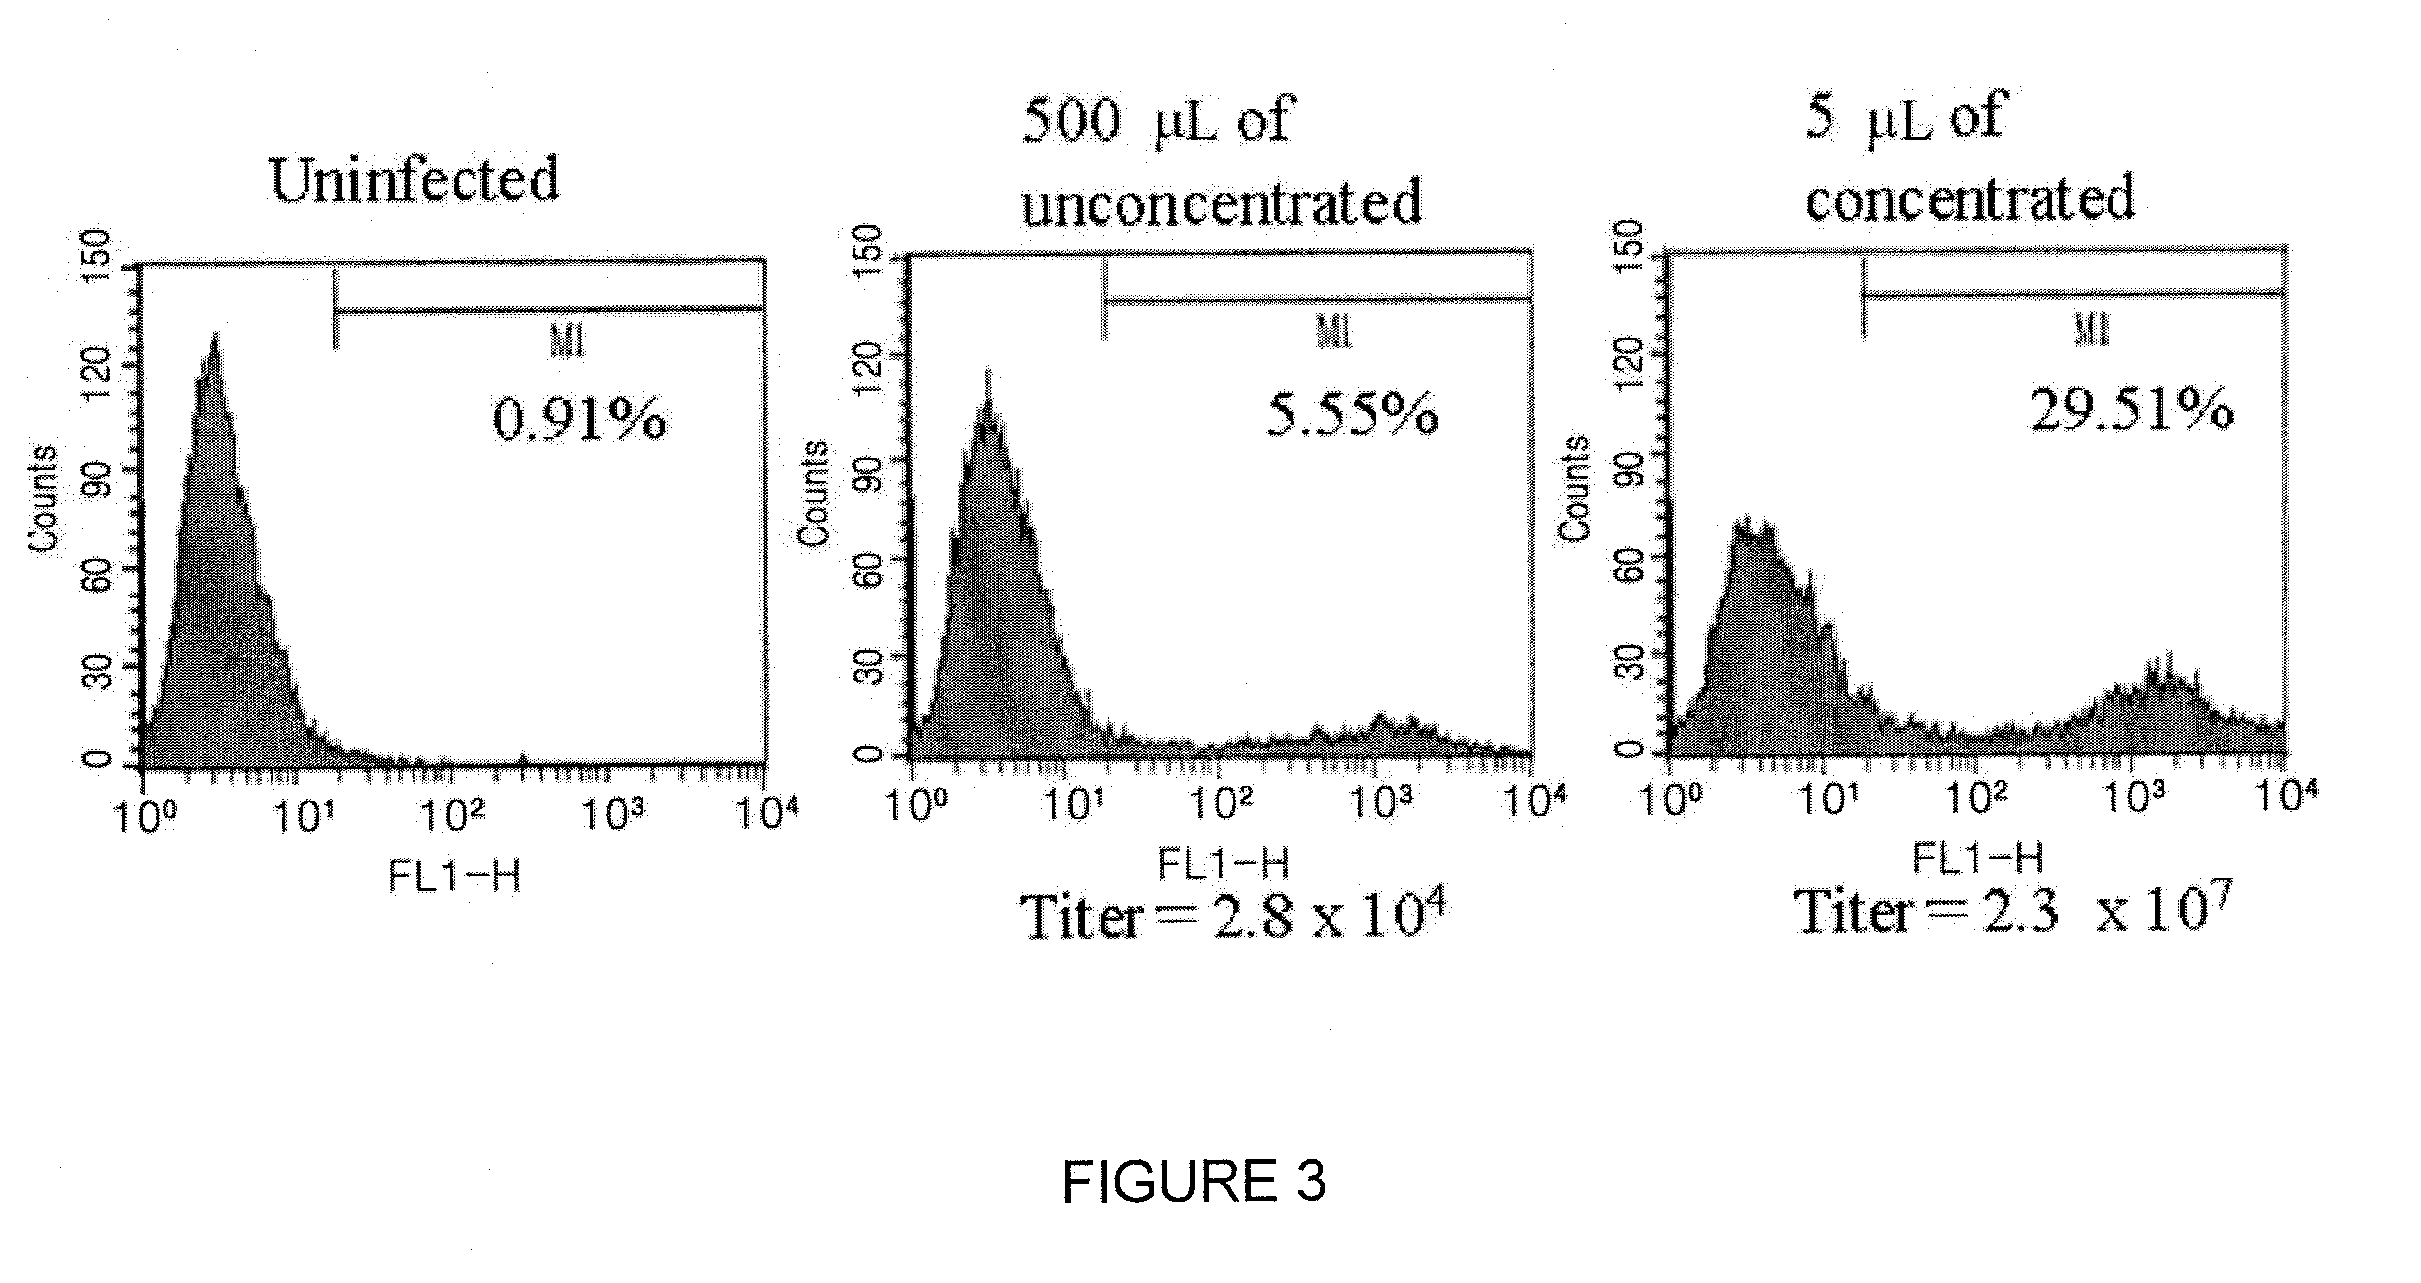 Recombinant expression vector system for variants of coagulation factor VIII and von Willebrand factor